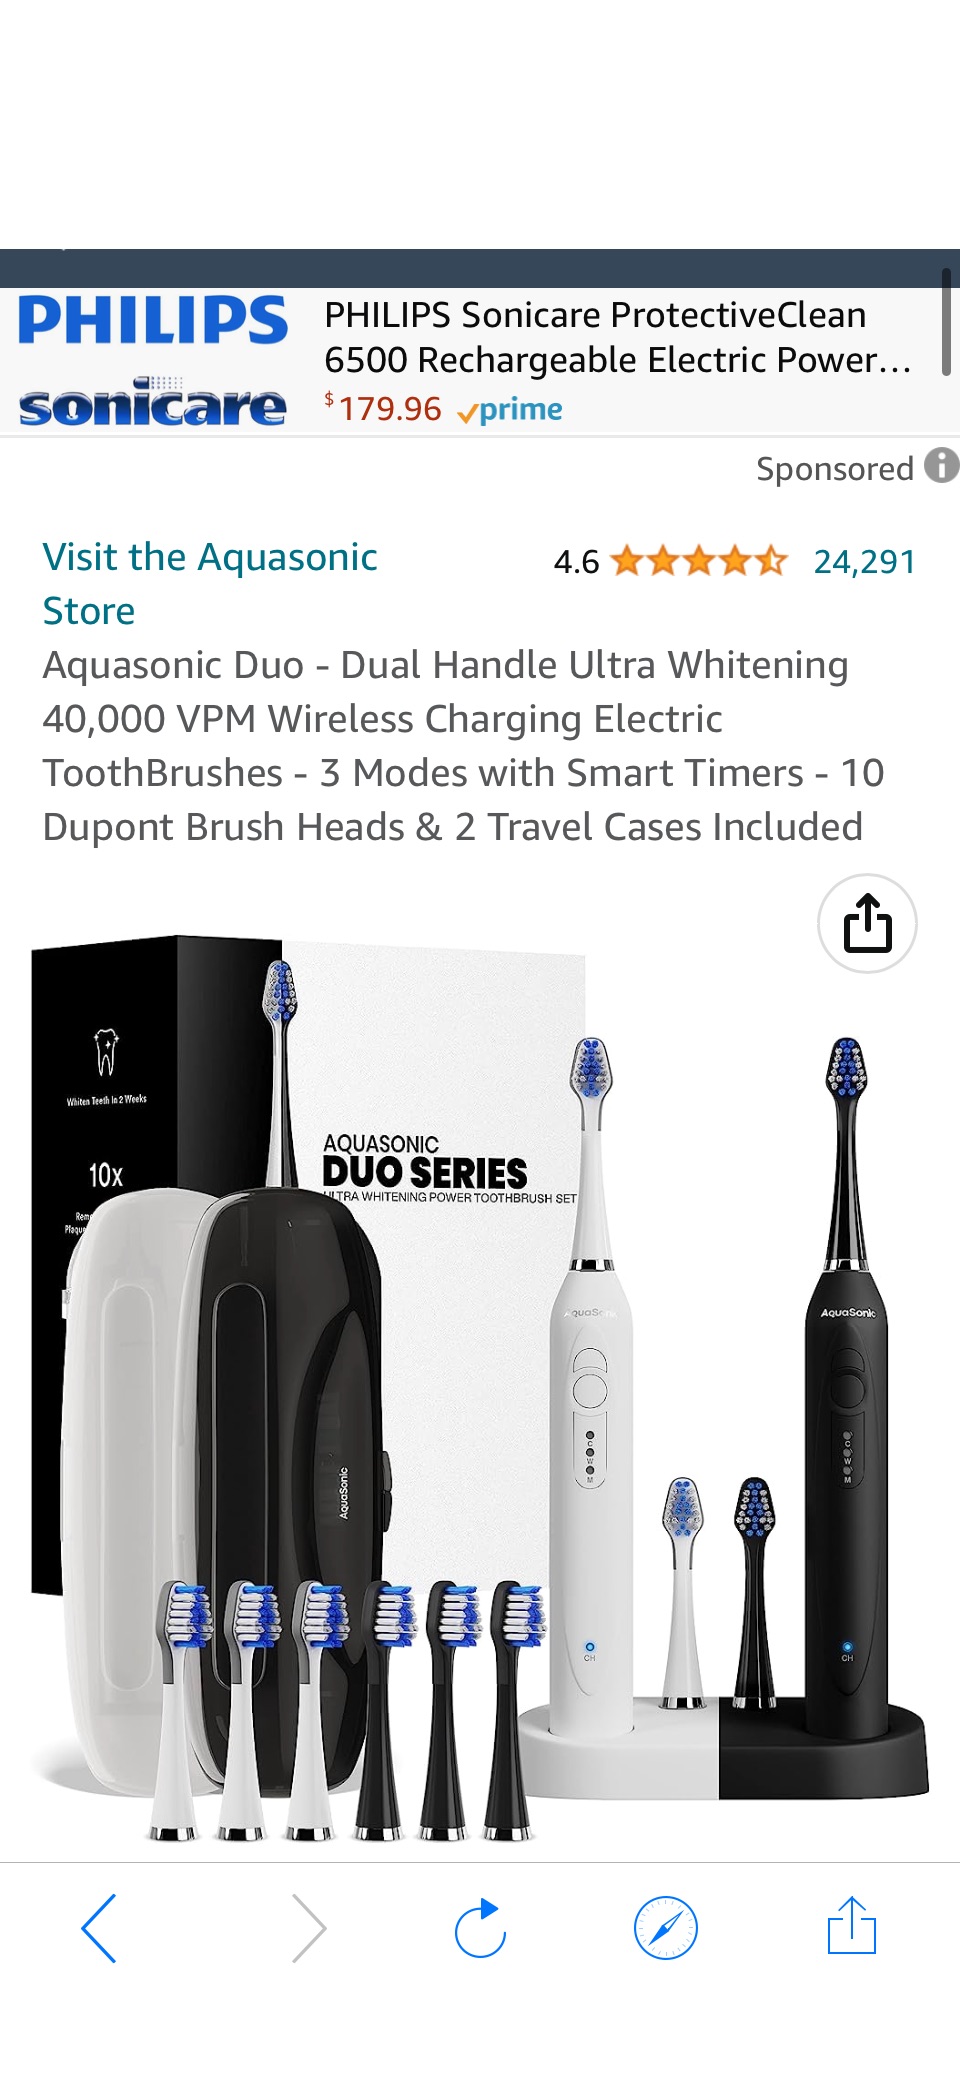 Amazon.com: Aquasonic Duo - Dual Handle Ultra Whitening 40,000 VPM Wireless Charging Electric ToothBrushes - 3 Modes with原价69.95